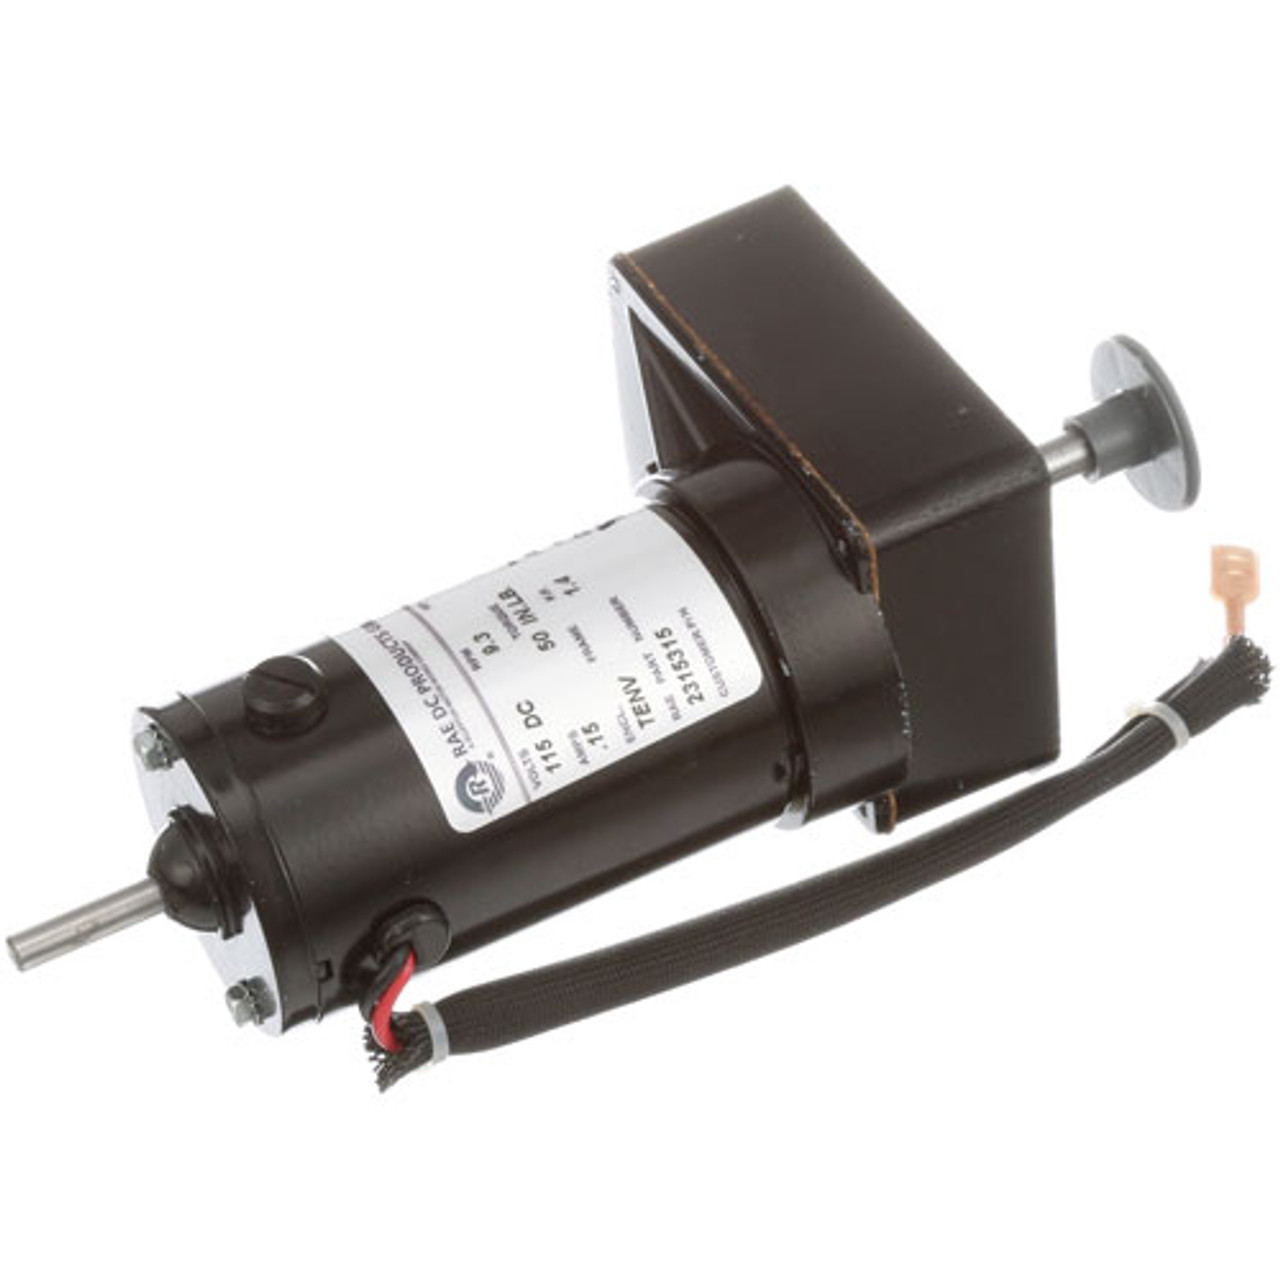 Motor, Toaster - 115V Dc - Replacement Part For Middleby Marshall 52223